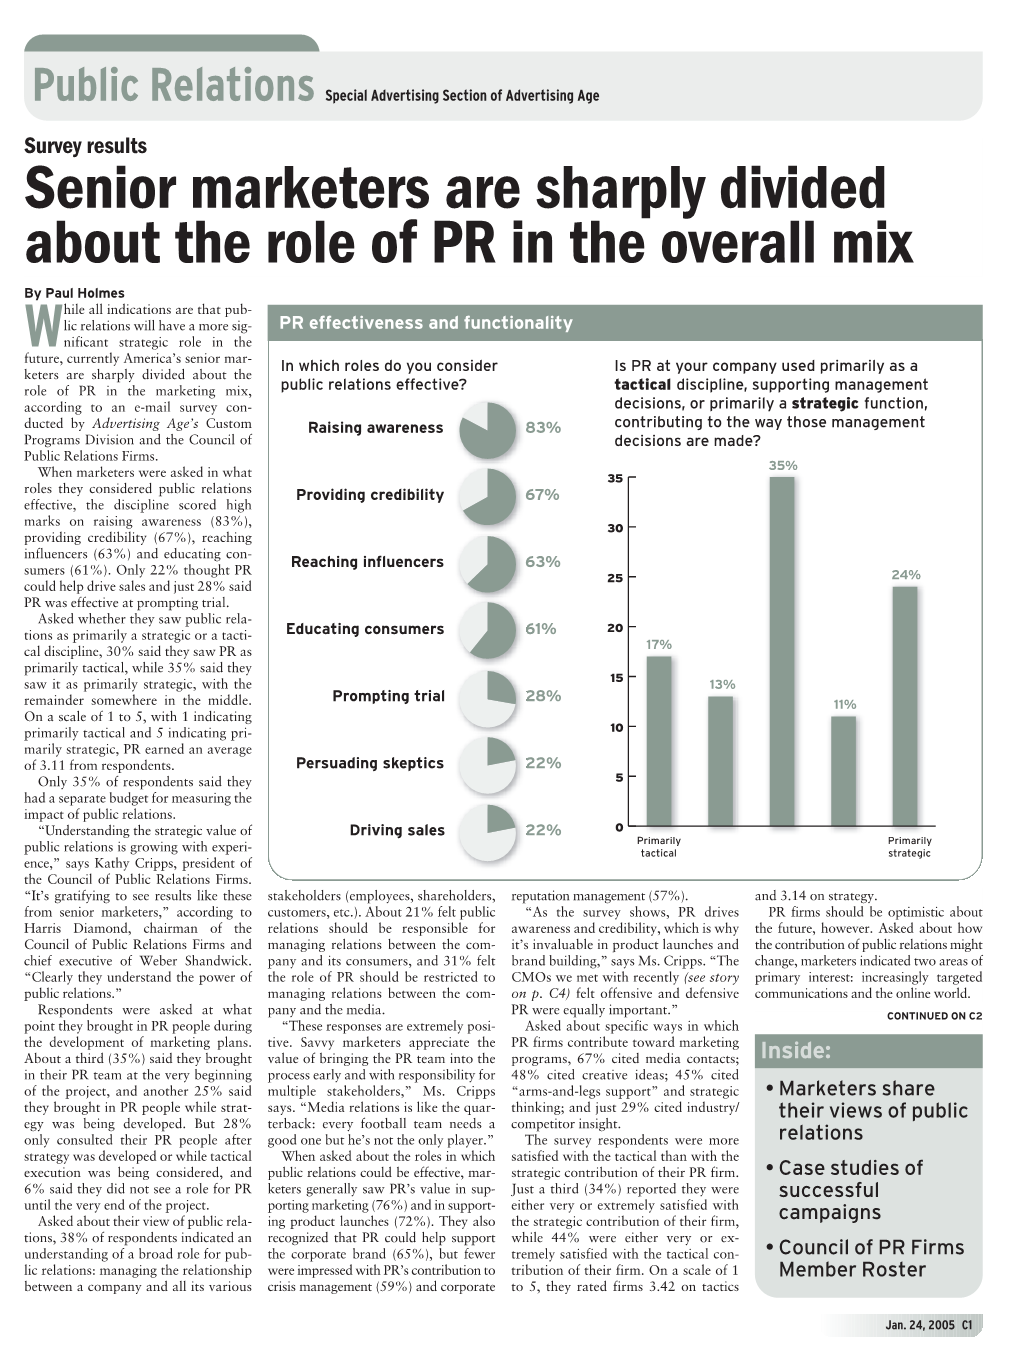 Senior Marketers Are Sharply Divided About the Role of PR in the Overall